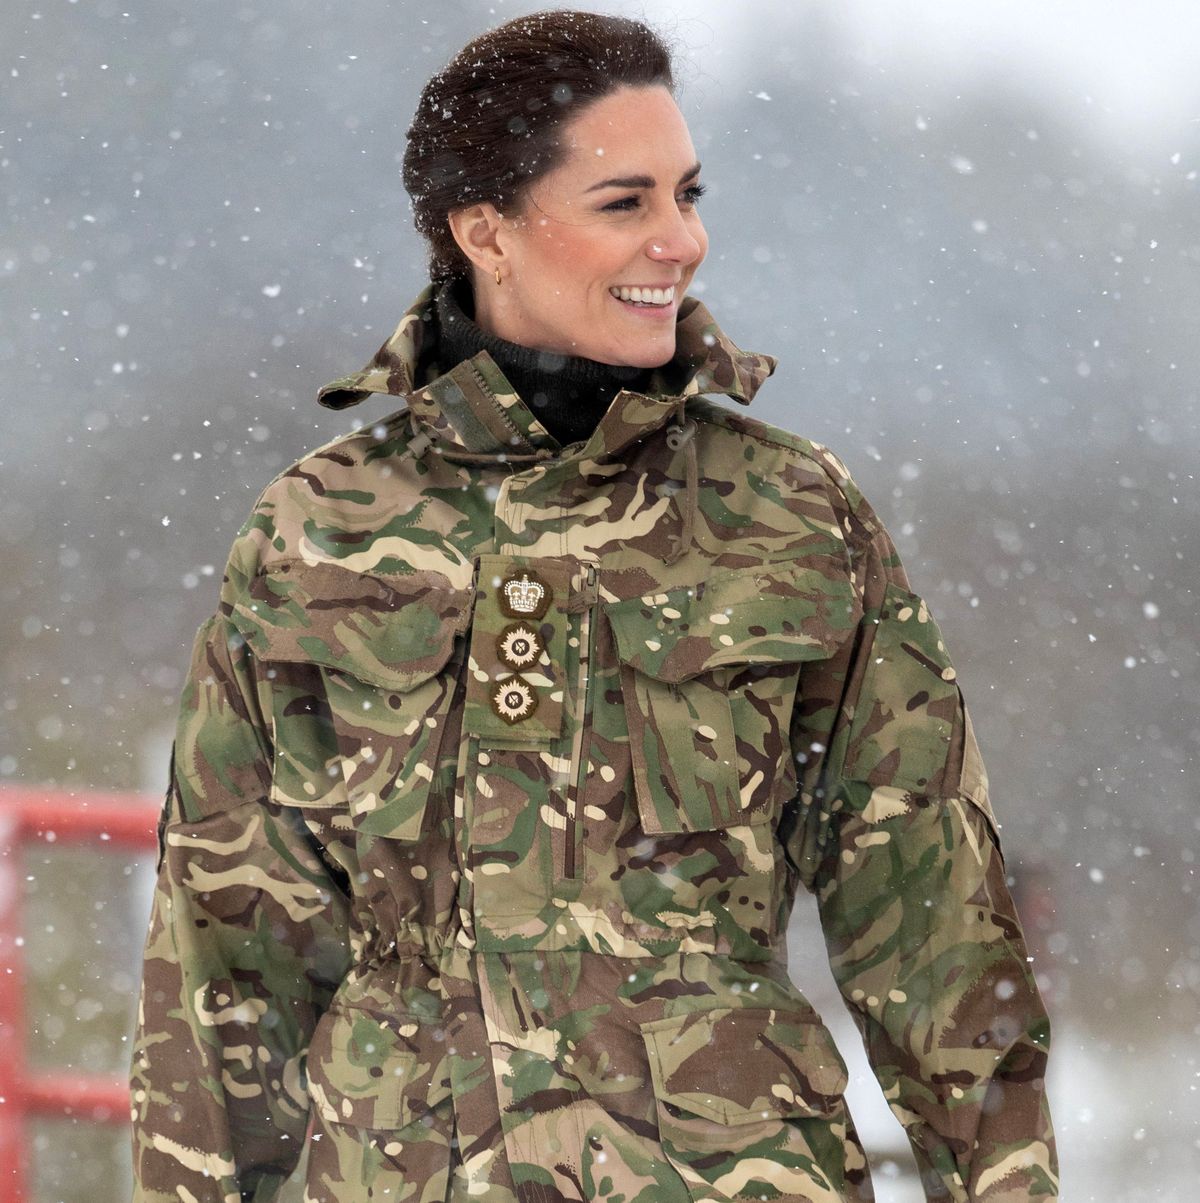 britains catherine, princess of wales reacts as she meets members of the 1st battalion irish guards during her visit to the salisbury plain training area, near salisbury, southern england, on march 8, 2023 photo by steve reigate pool afp photo by steve reigatepoolafp via getty images